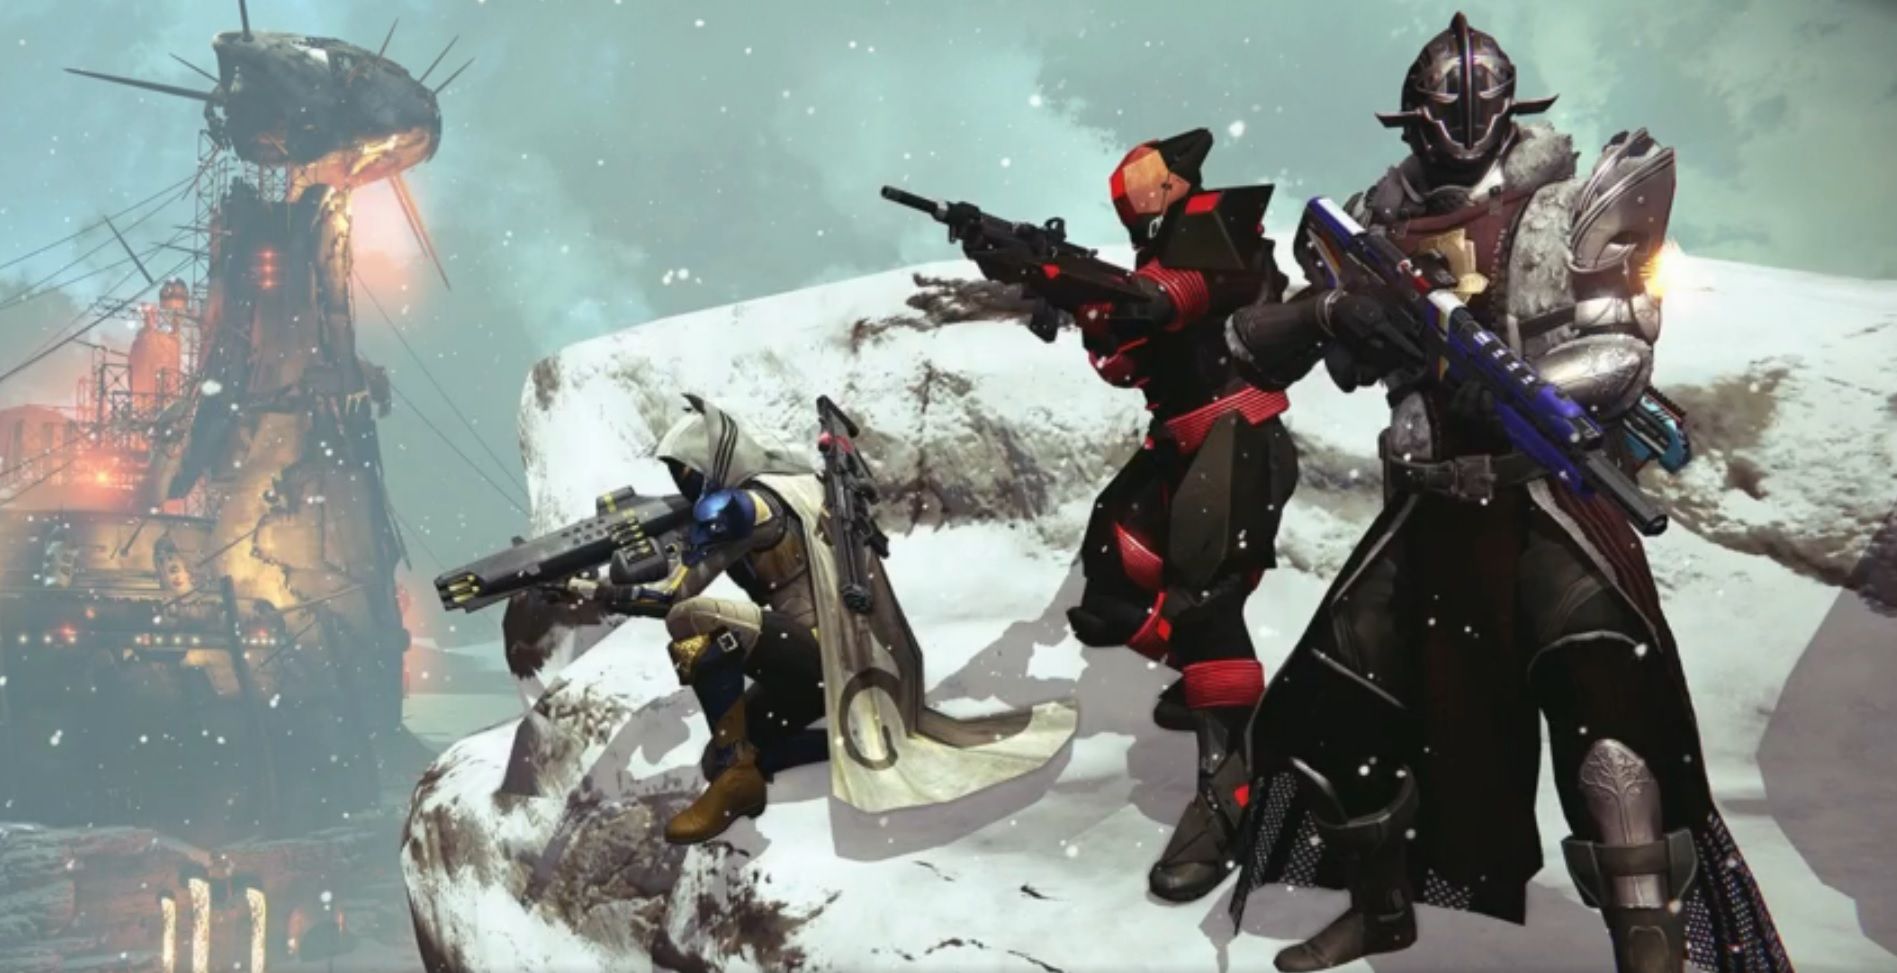 The Plaguelands in Destiny: Rise of Iron